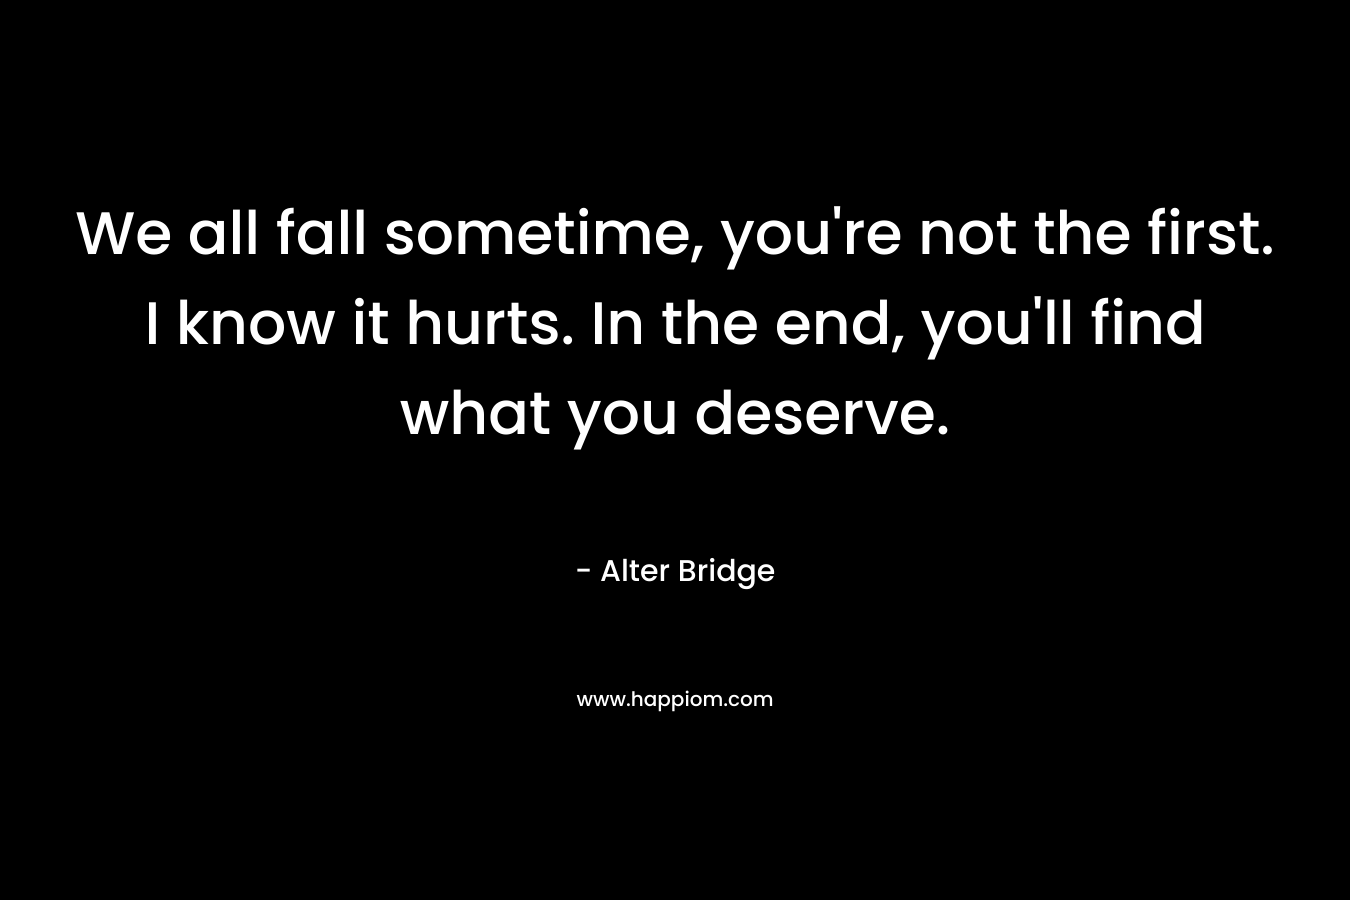 We all fall sometime, you're not the first. I know it hurts. In the end, you'll find what you deserve.